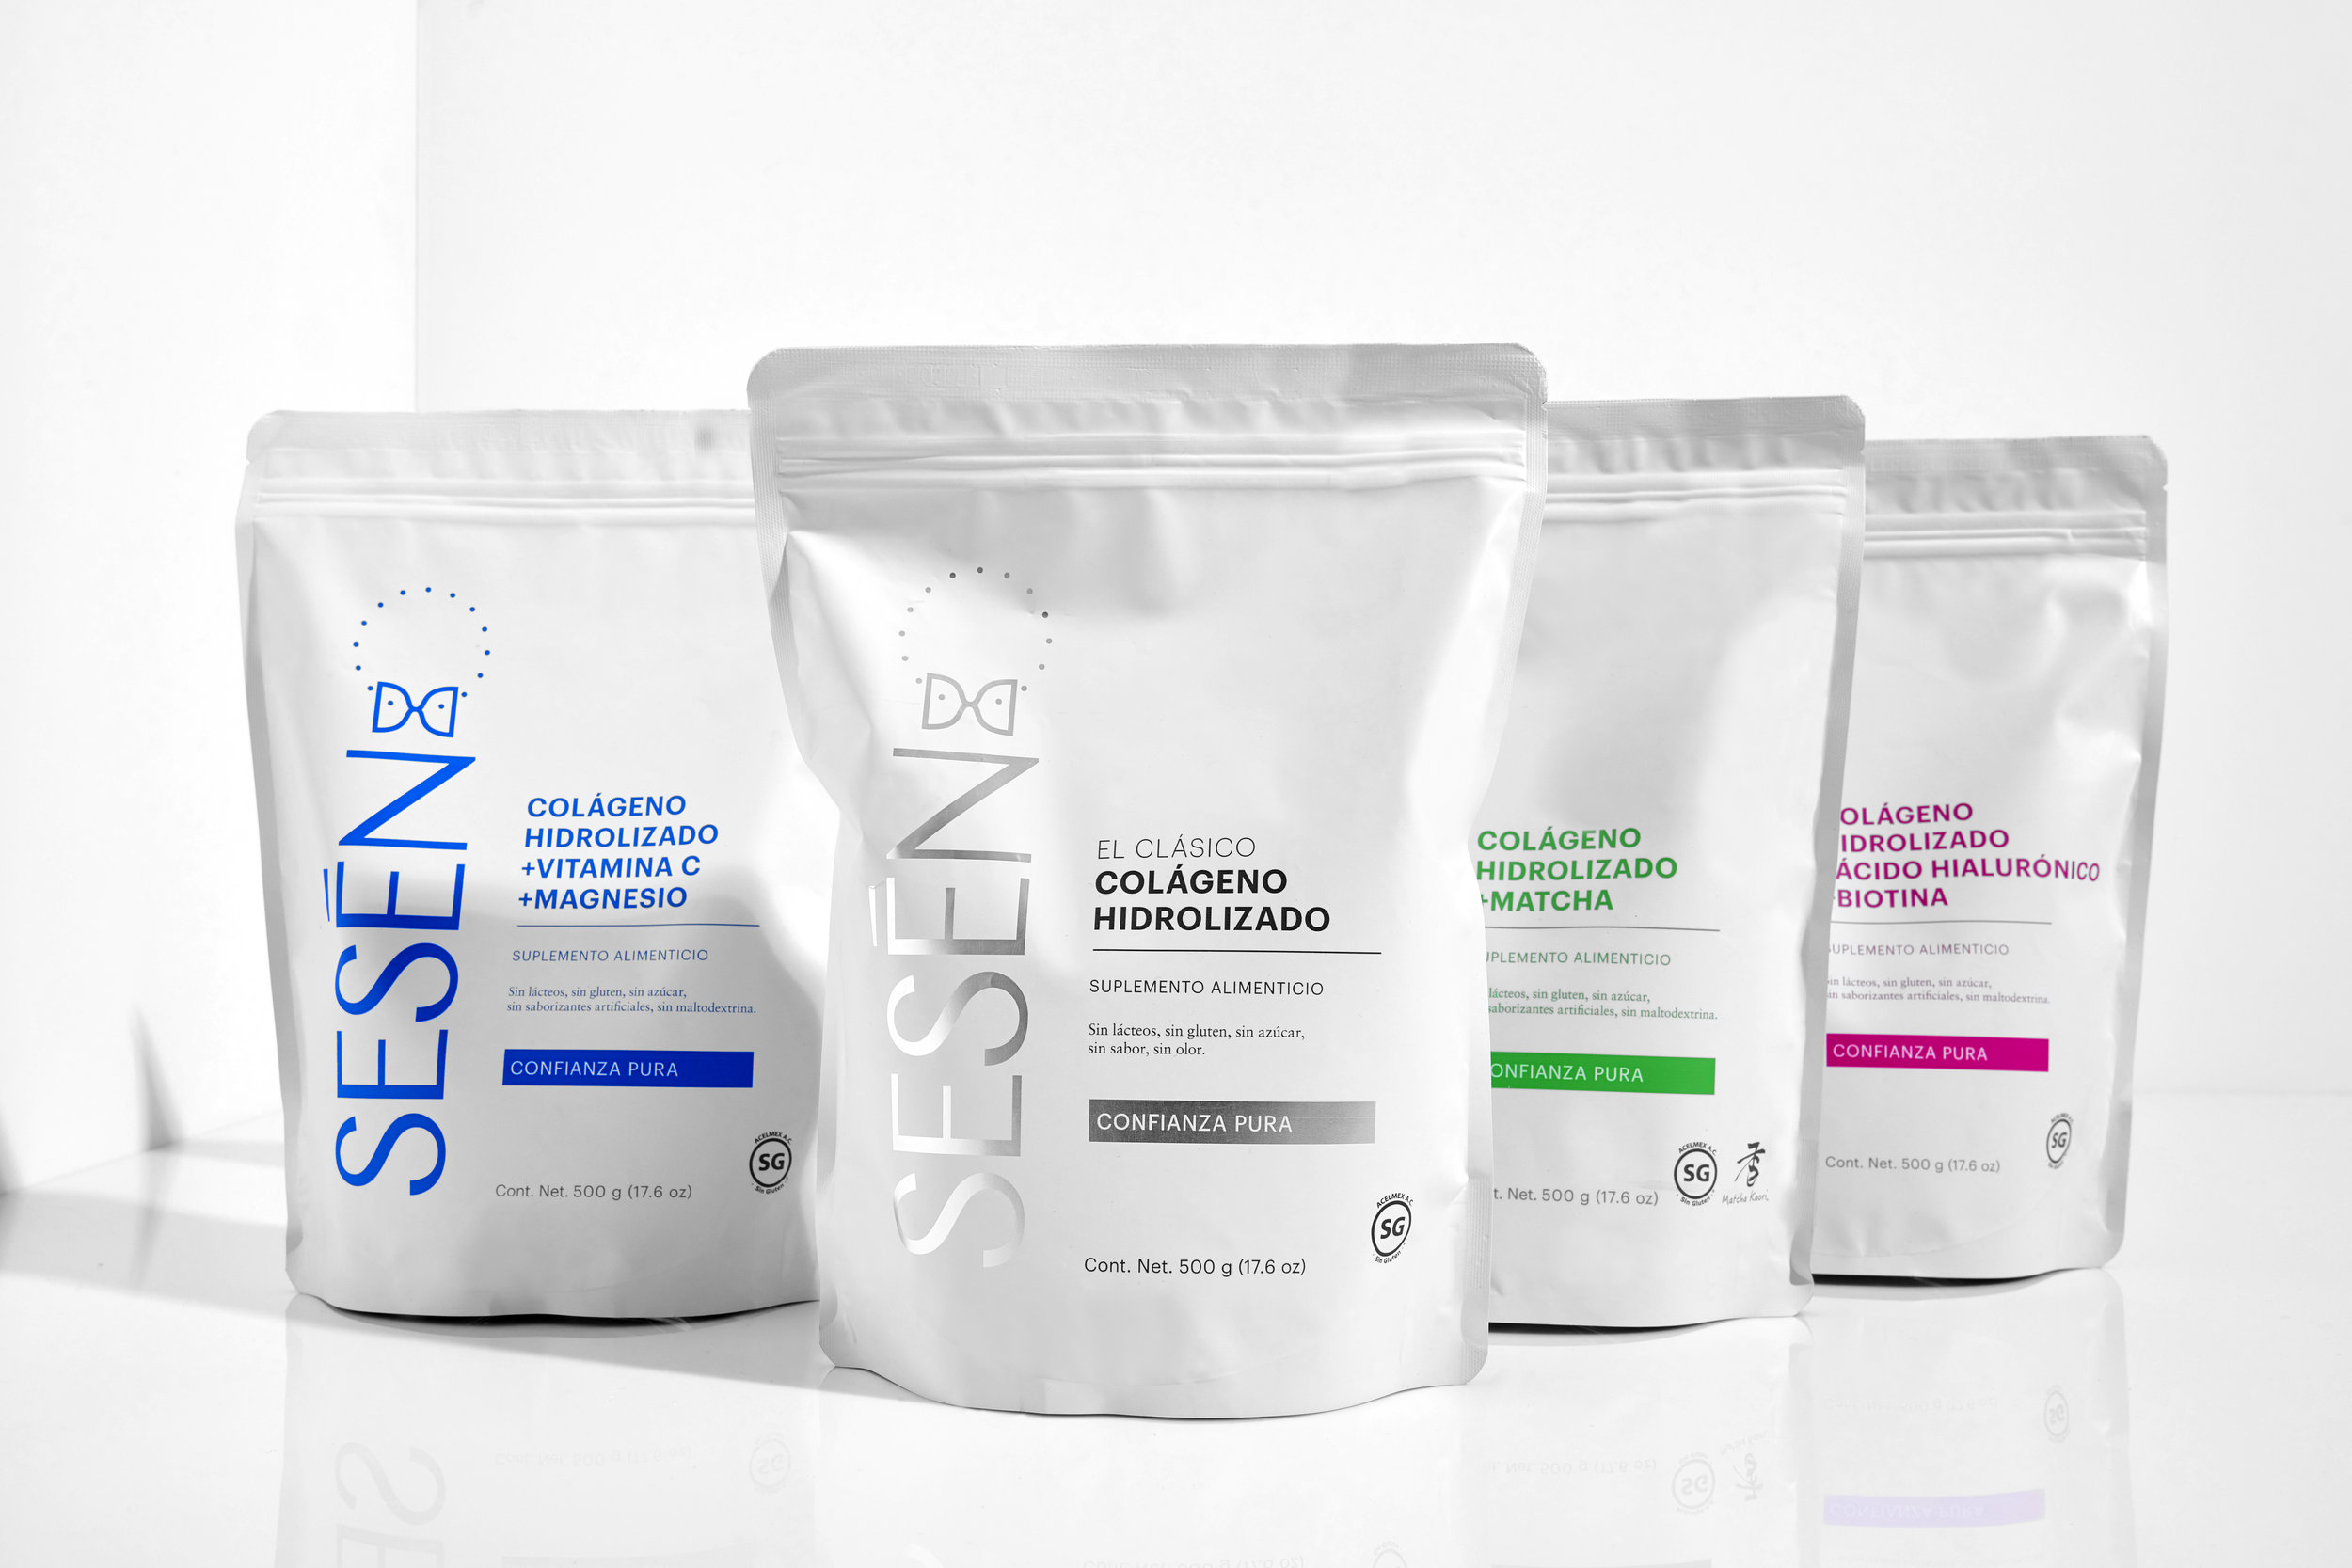 Beauty and Health Company Creates Packaging Design for New Dietary Supplements Range